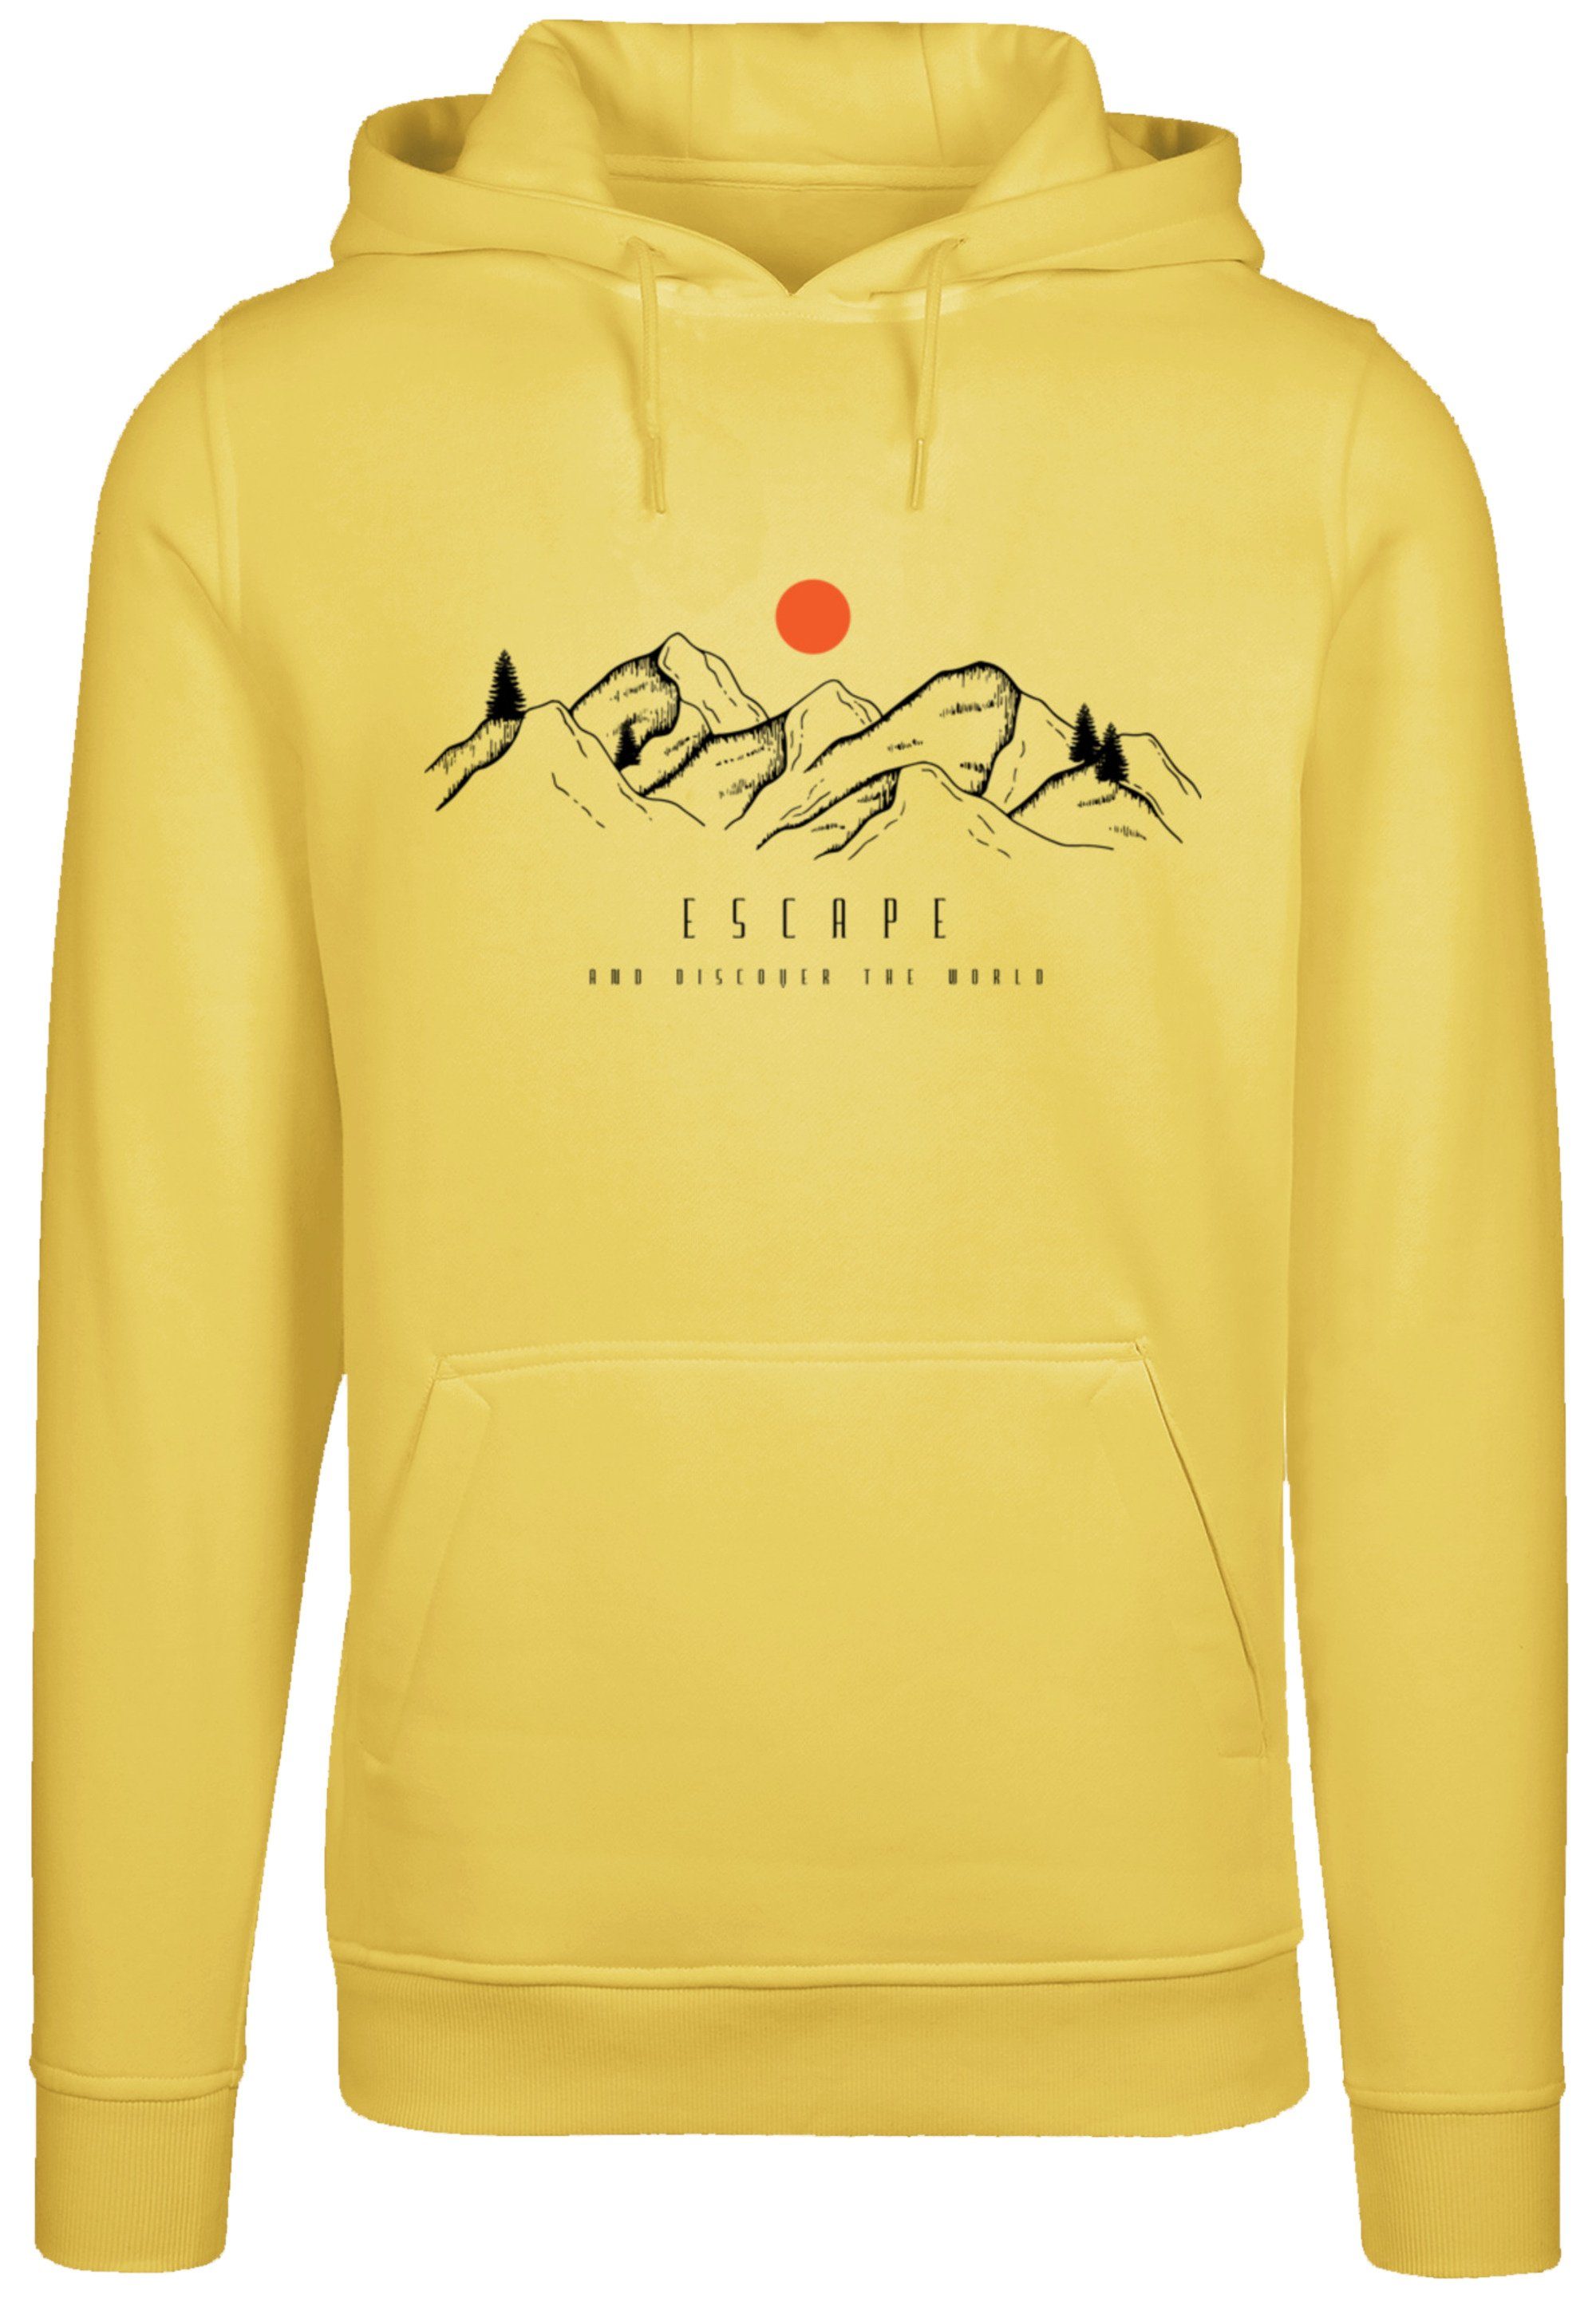 Warm, F4NT4STIC Kapuzenpullover Hoodie, world Bequem Discover the